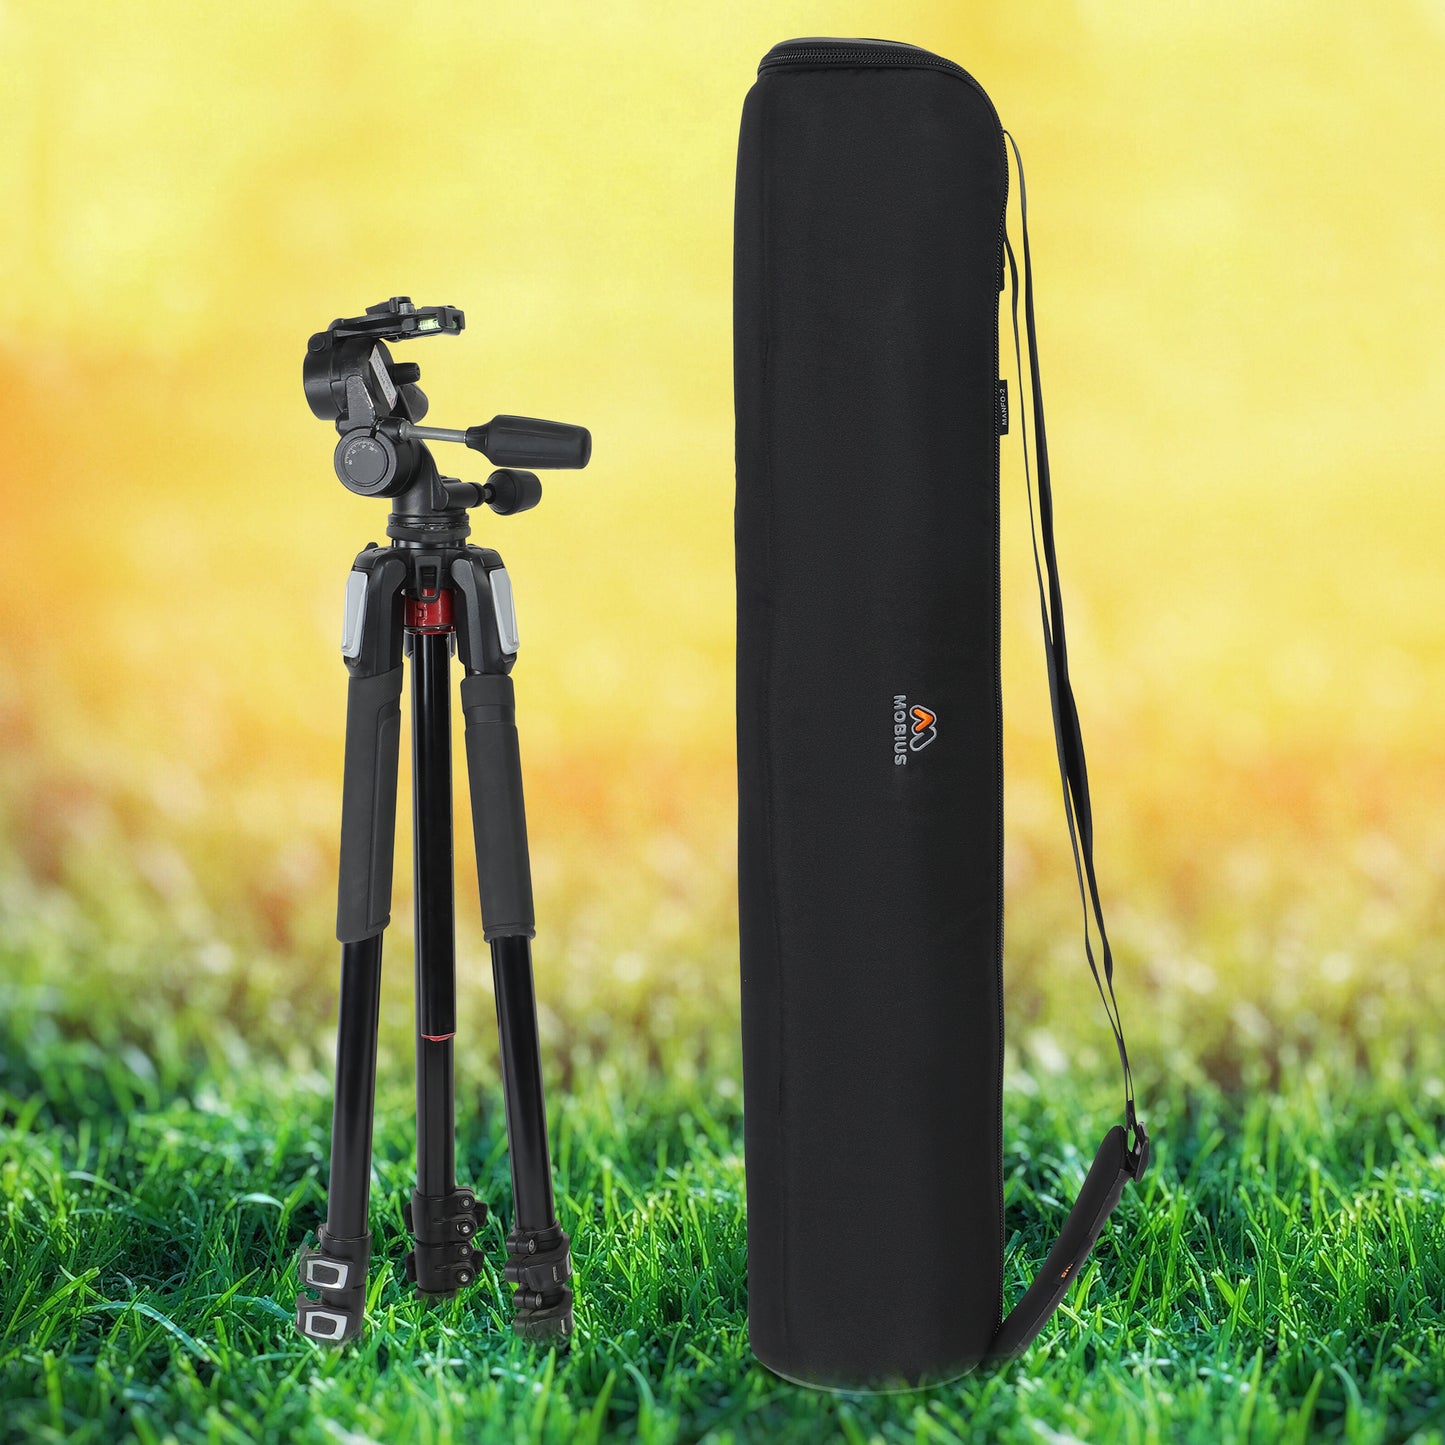 Mobius Manfo 2 Tripod and Stand Bag